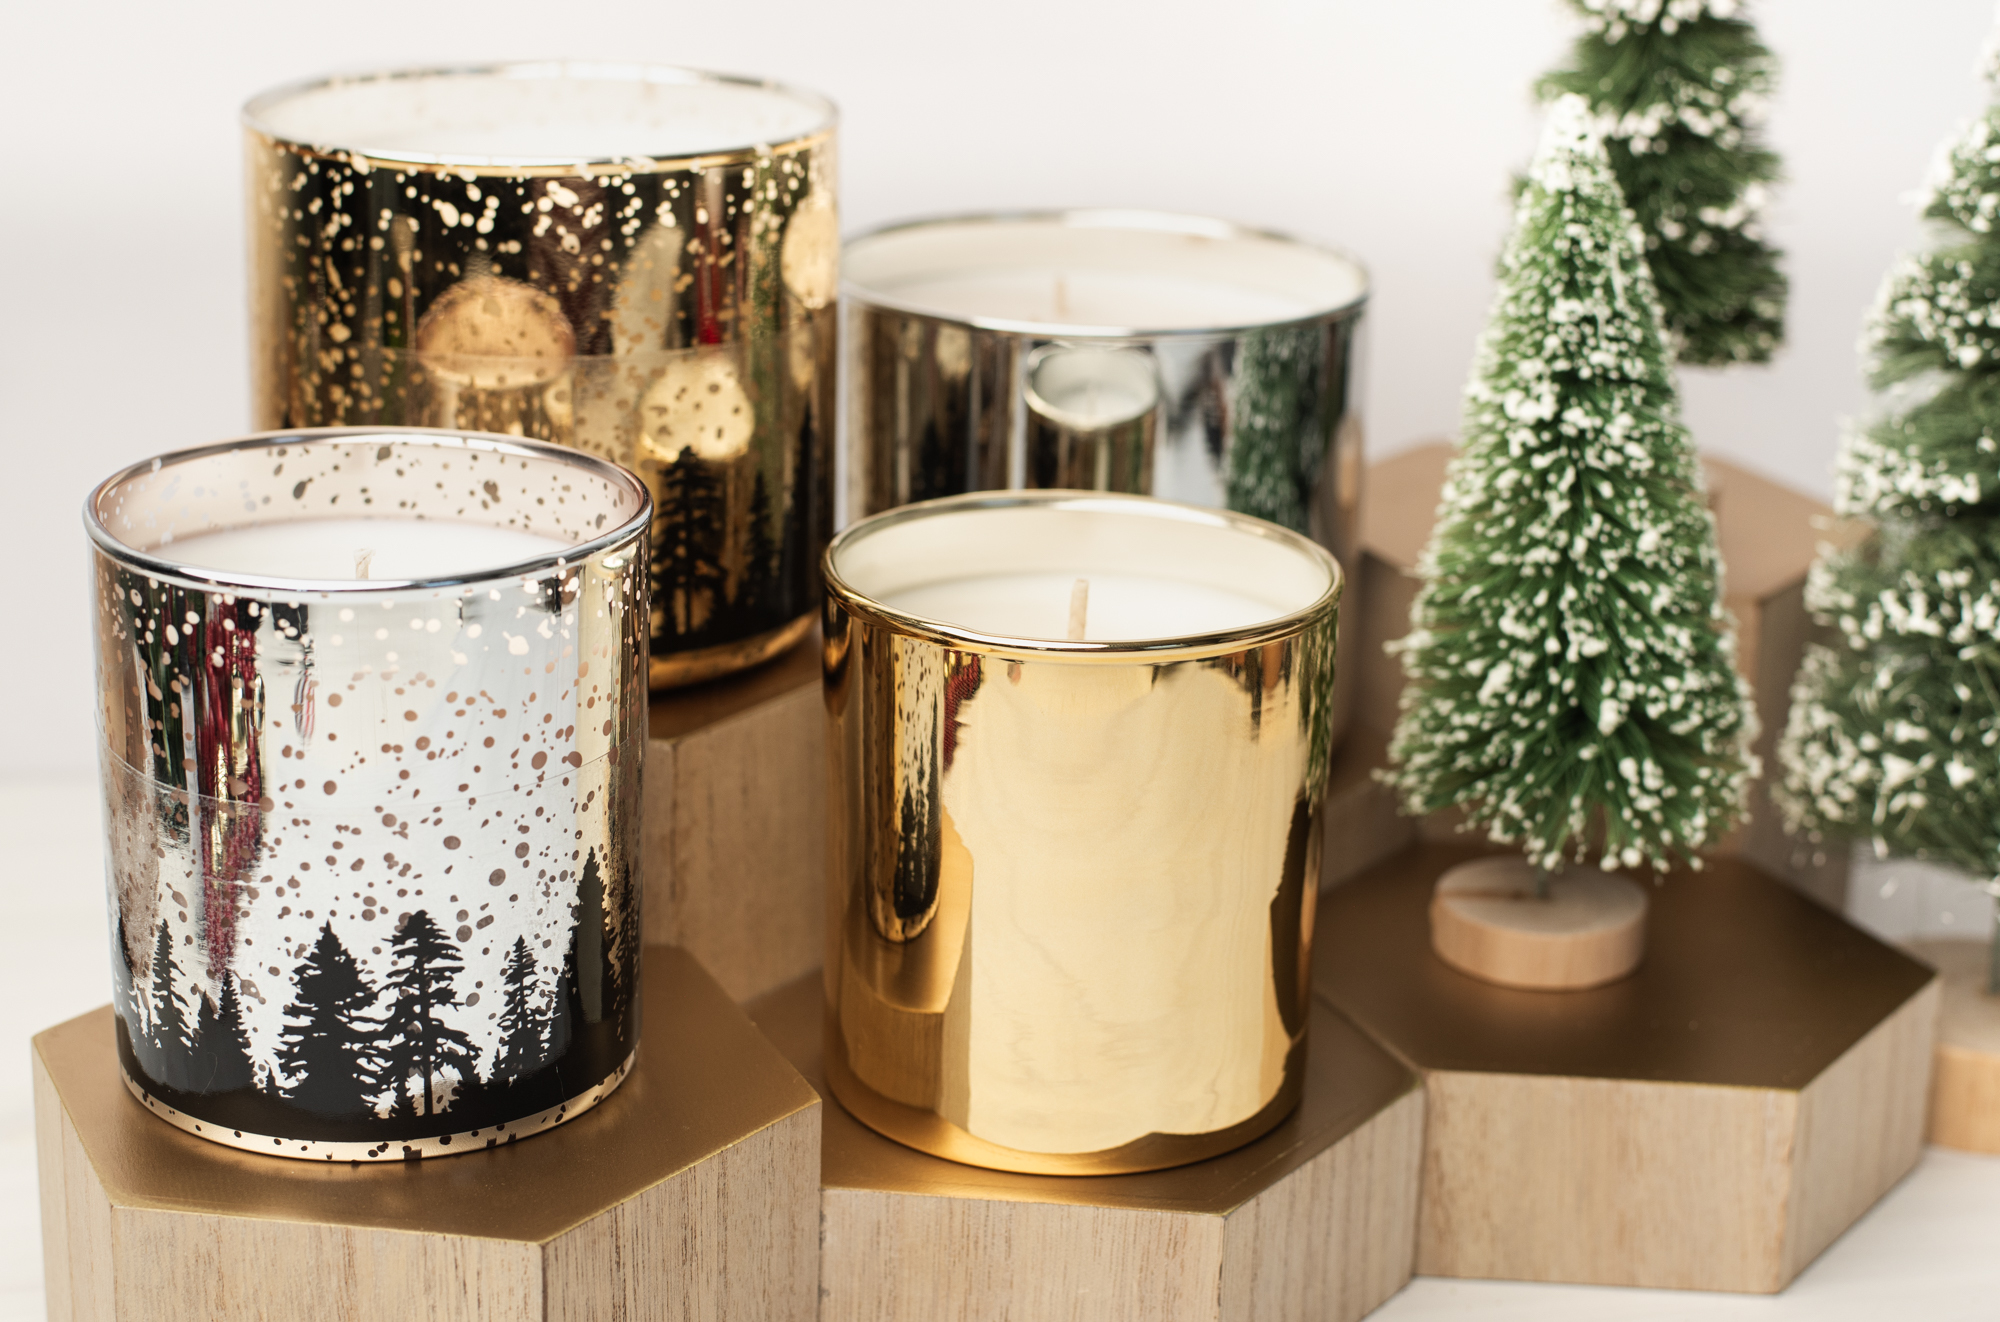 Candle containers in silver and gold beside small, snow-flocked Christmas tree figurines.